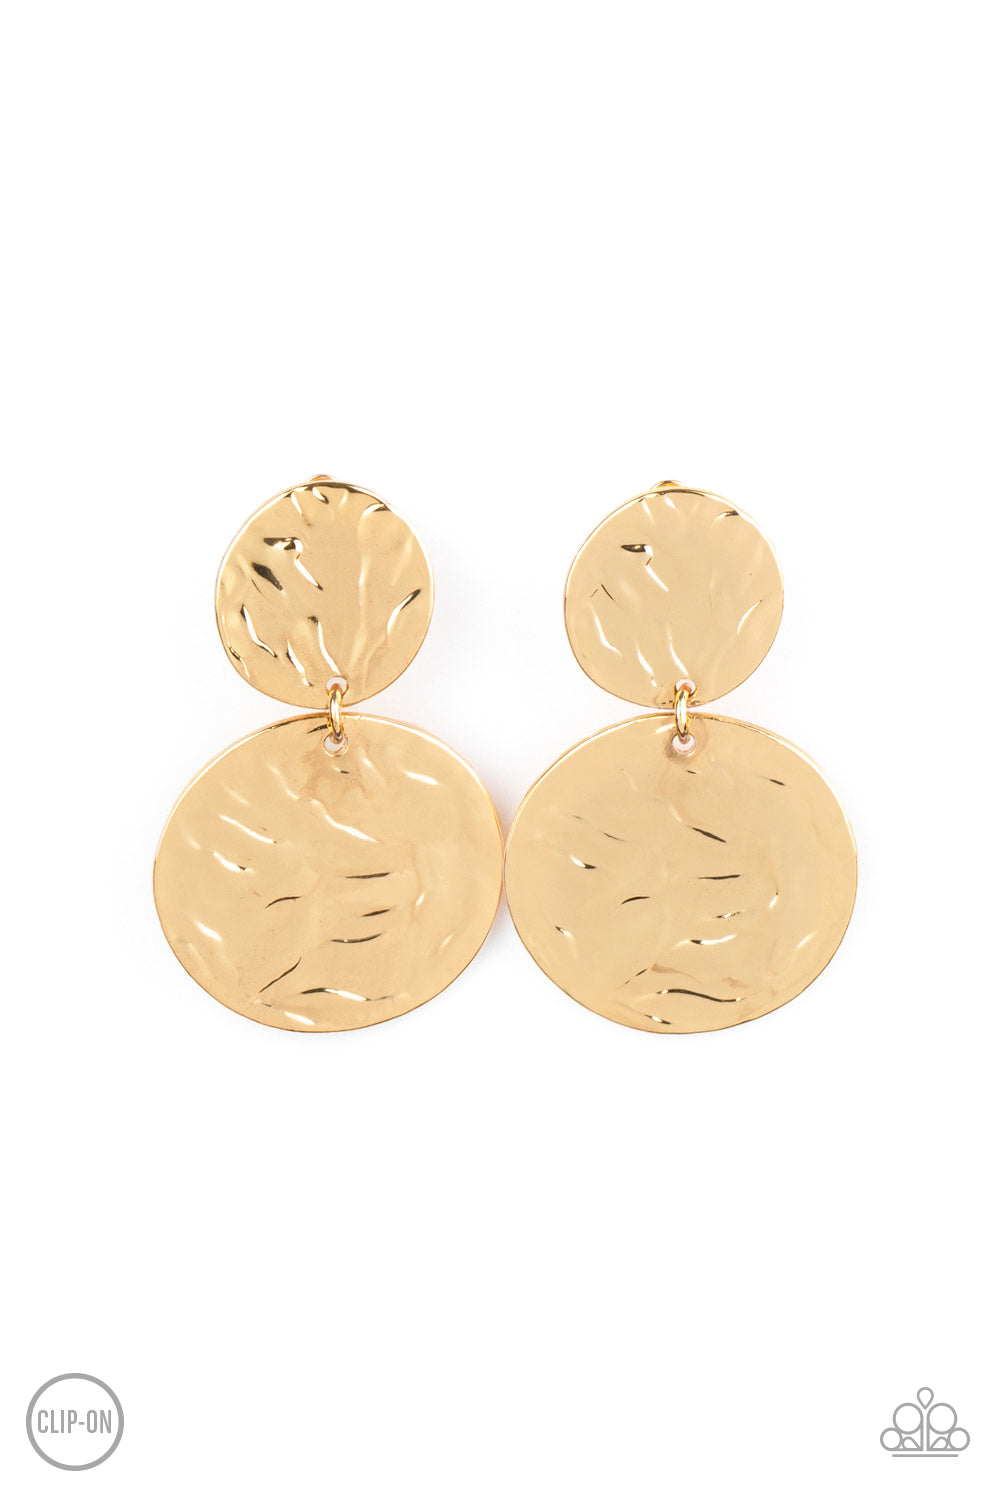 Paparazzi Accessories - Relic Ripple - Gold Earrings